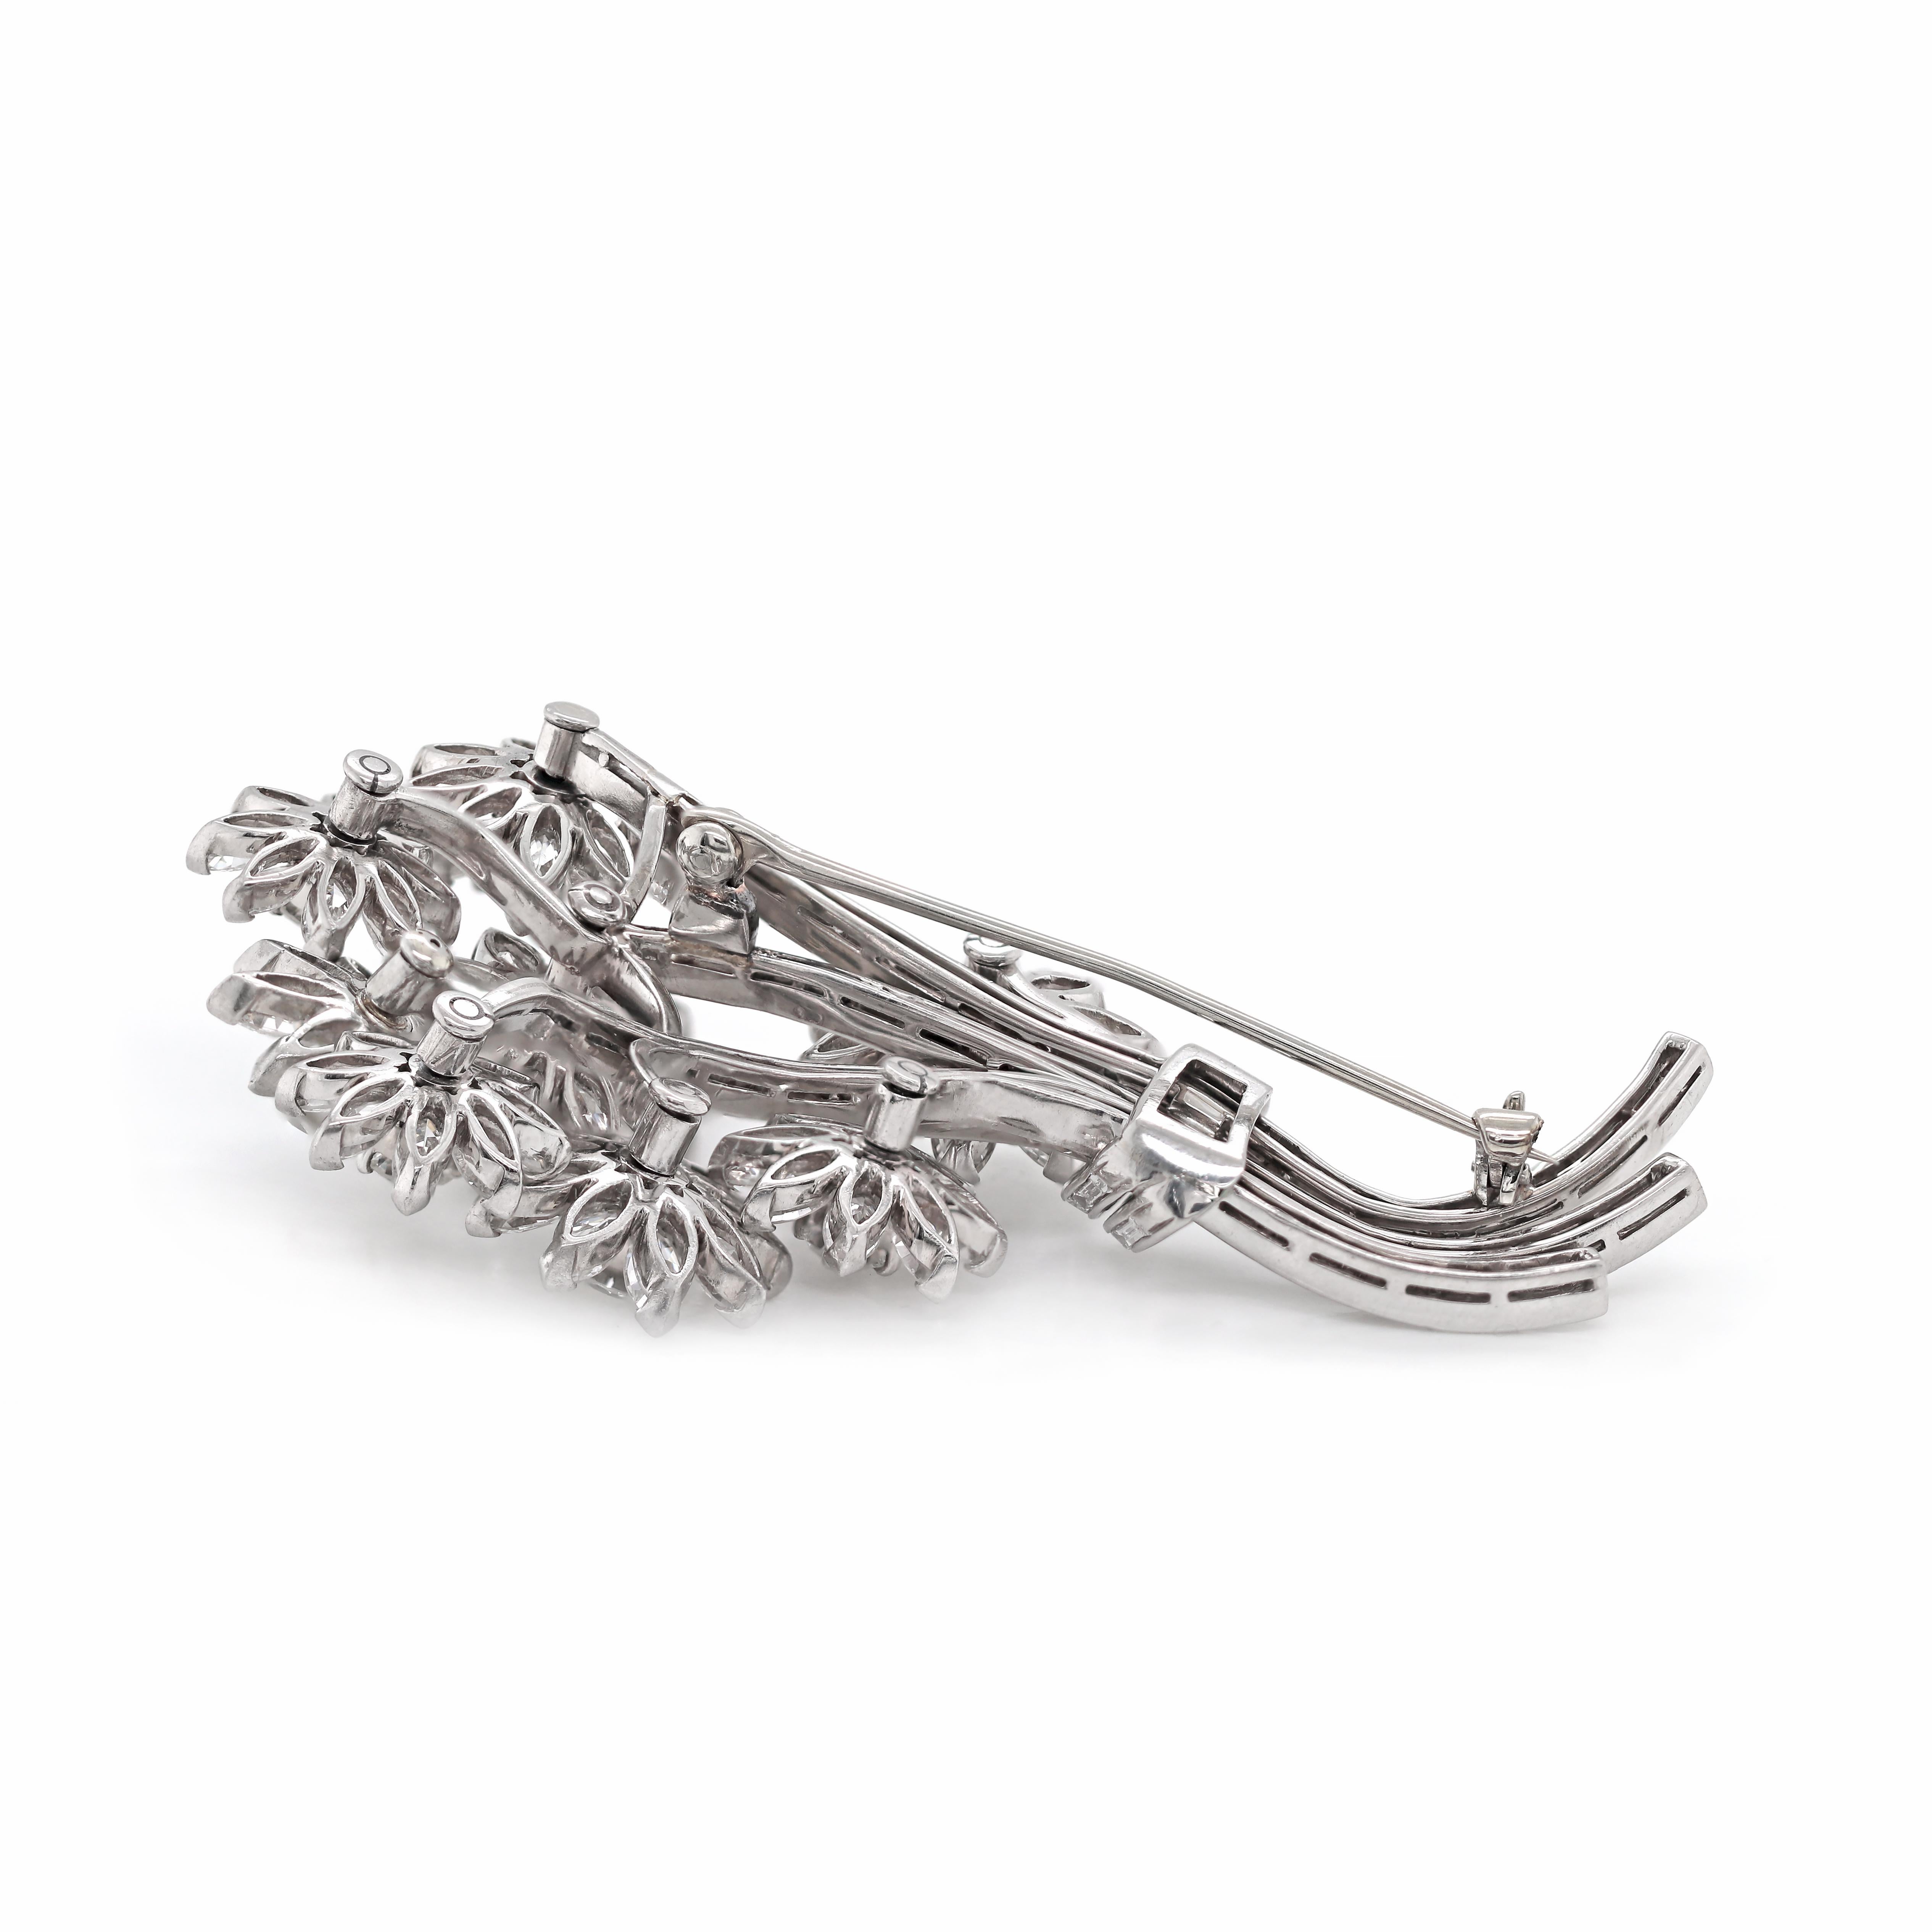 This incredible flower bouquet brooch features 8 rotating flowers, claw set with a round brilliant cut diamond in the center of 8-10 marquise shaped diamond petals. The flowers are beautifully connected to a spray of three baguette cut diamond set